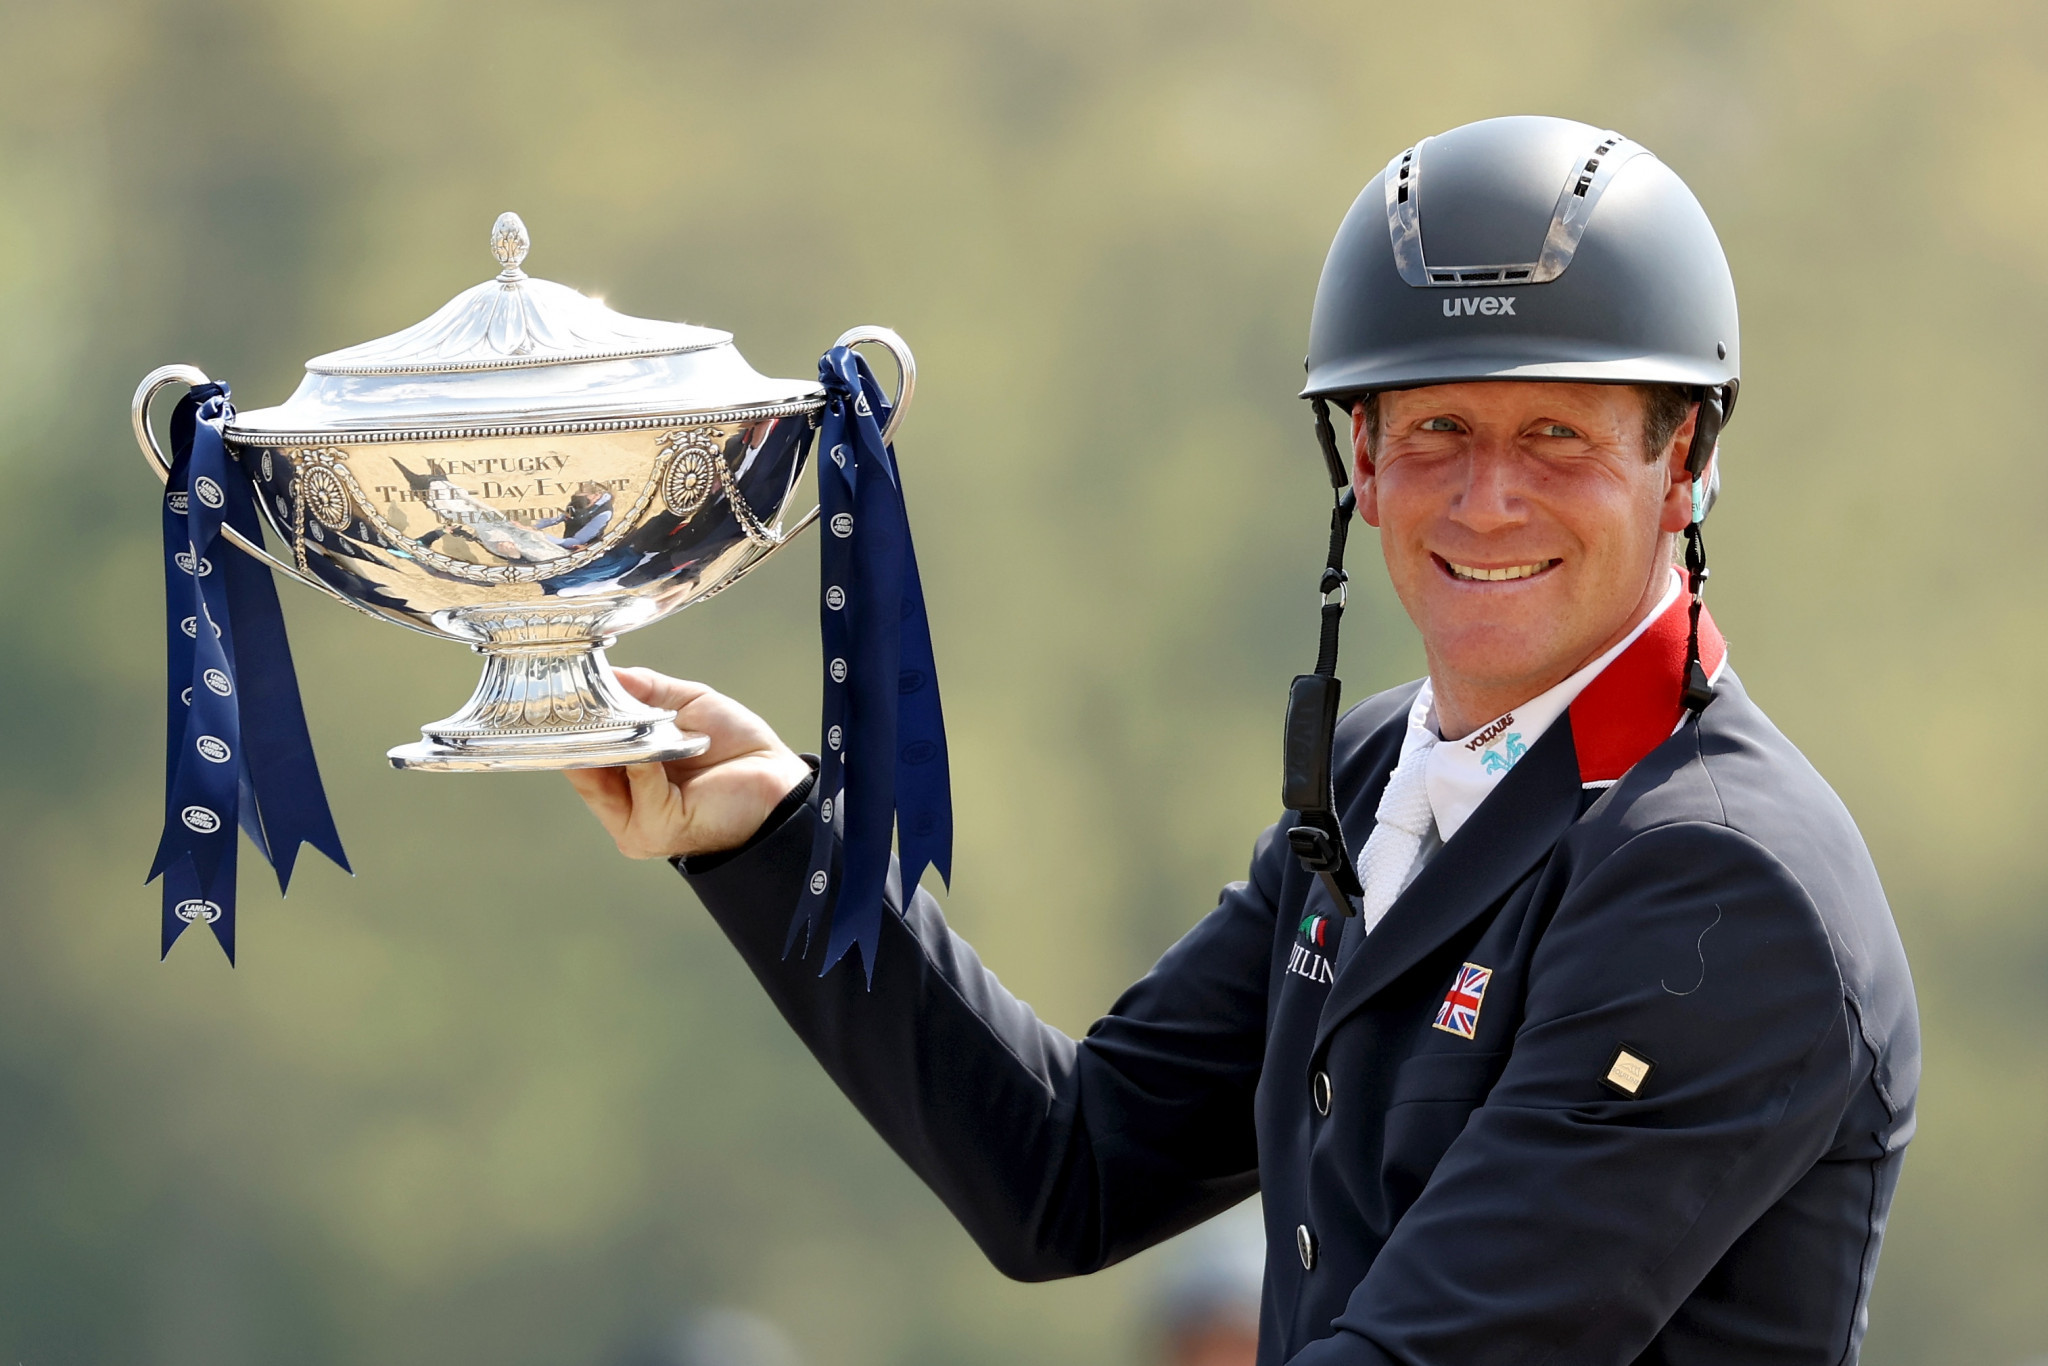 Townend earns third consecutive title at Kentucky Three-Day Event